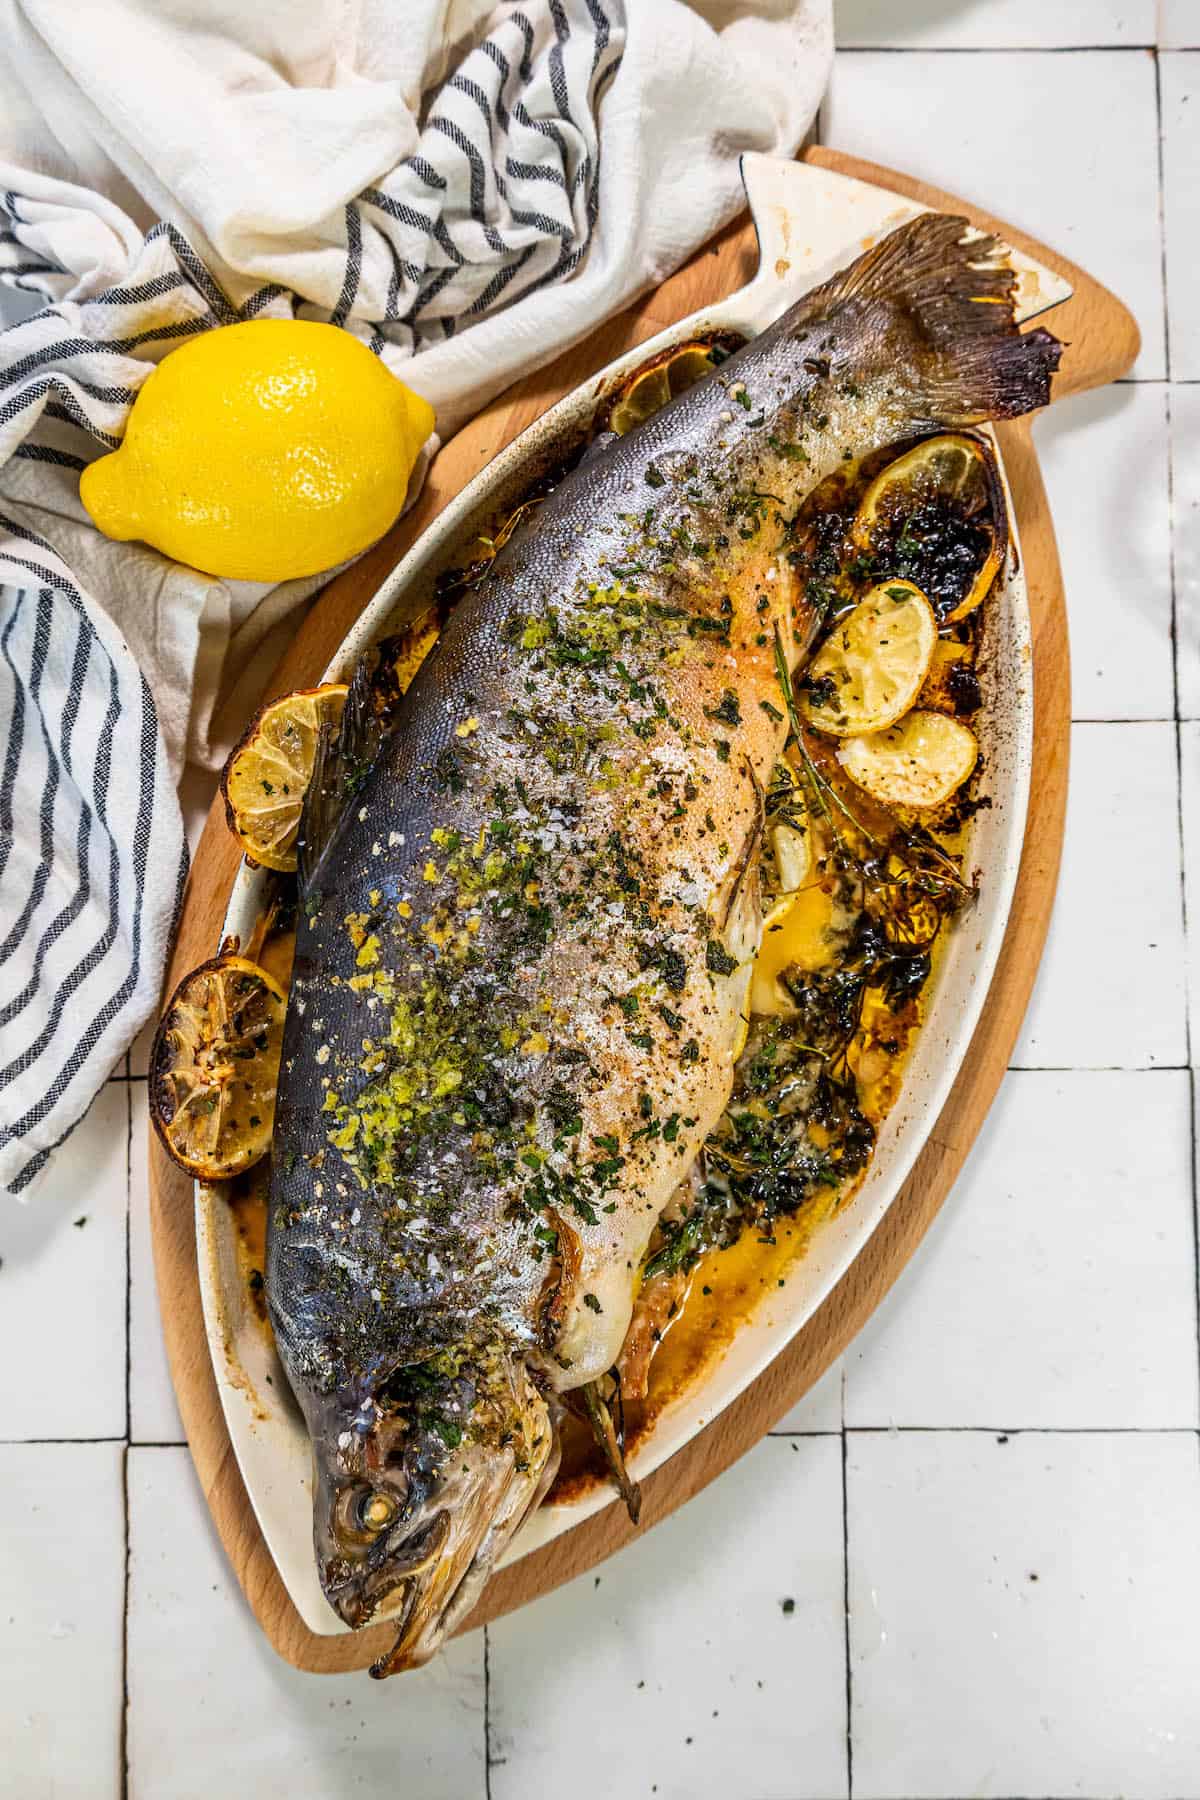 Herb-stuffed fish with lemons and herbs.